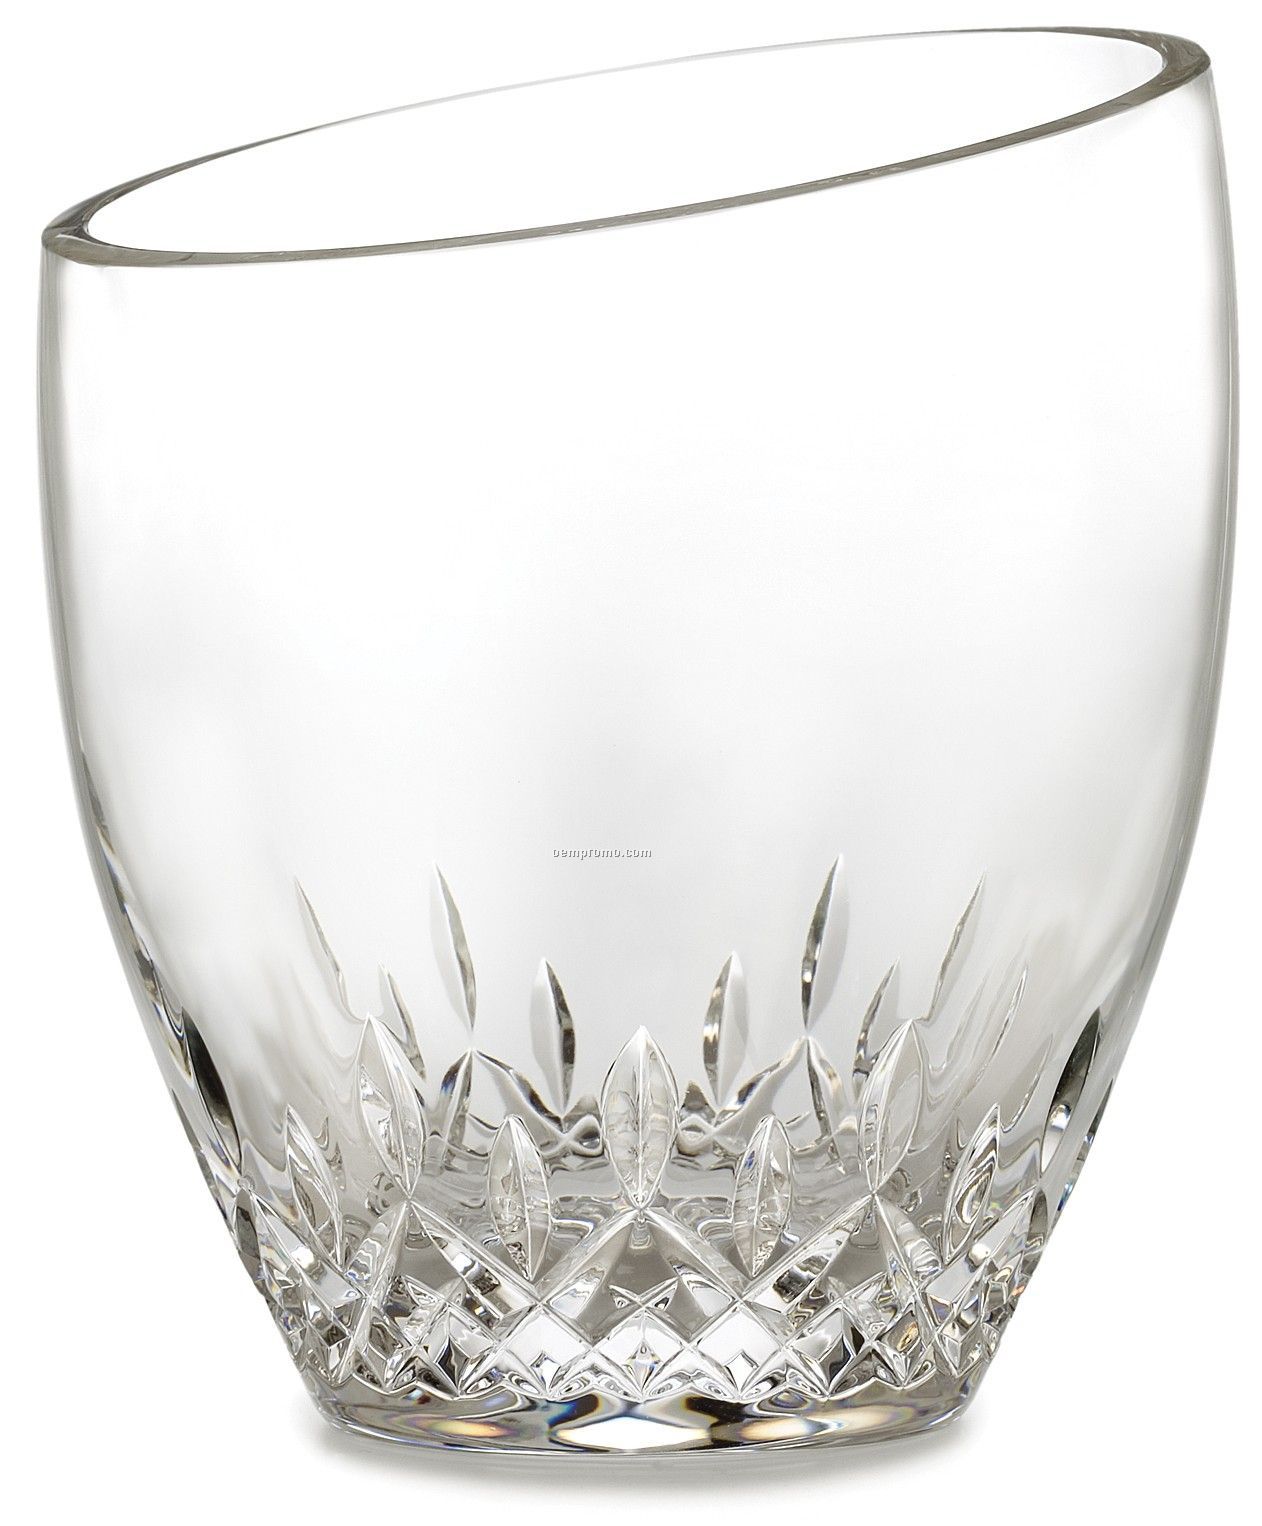 Waterford Lismore Essence Angled Top Ice Bucket